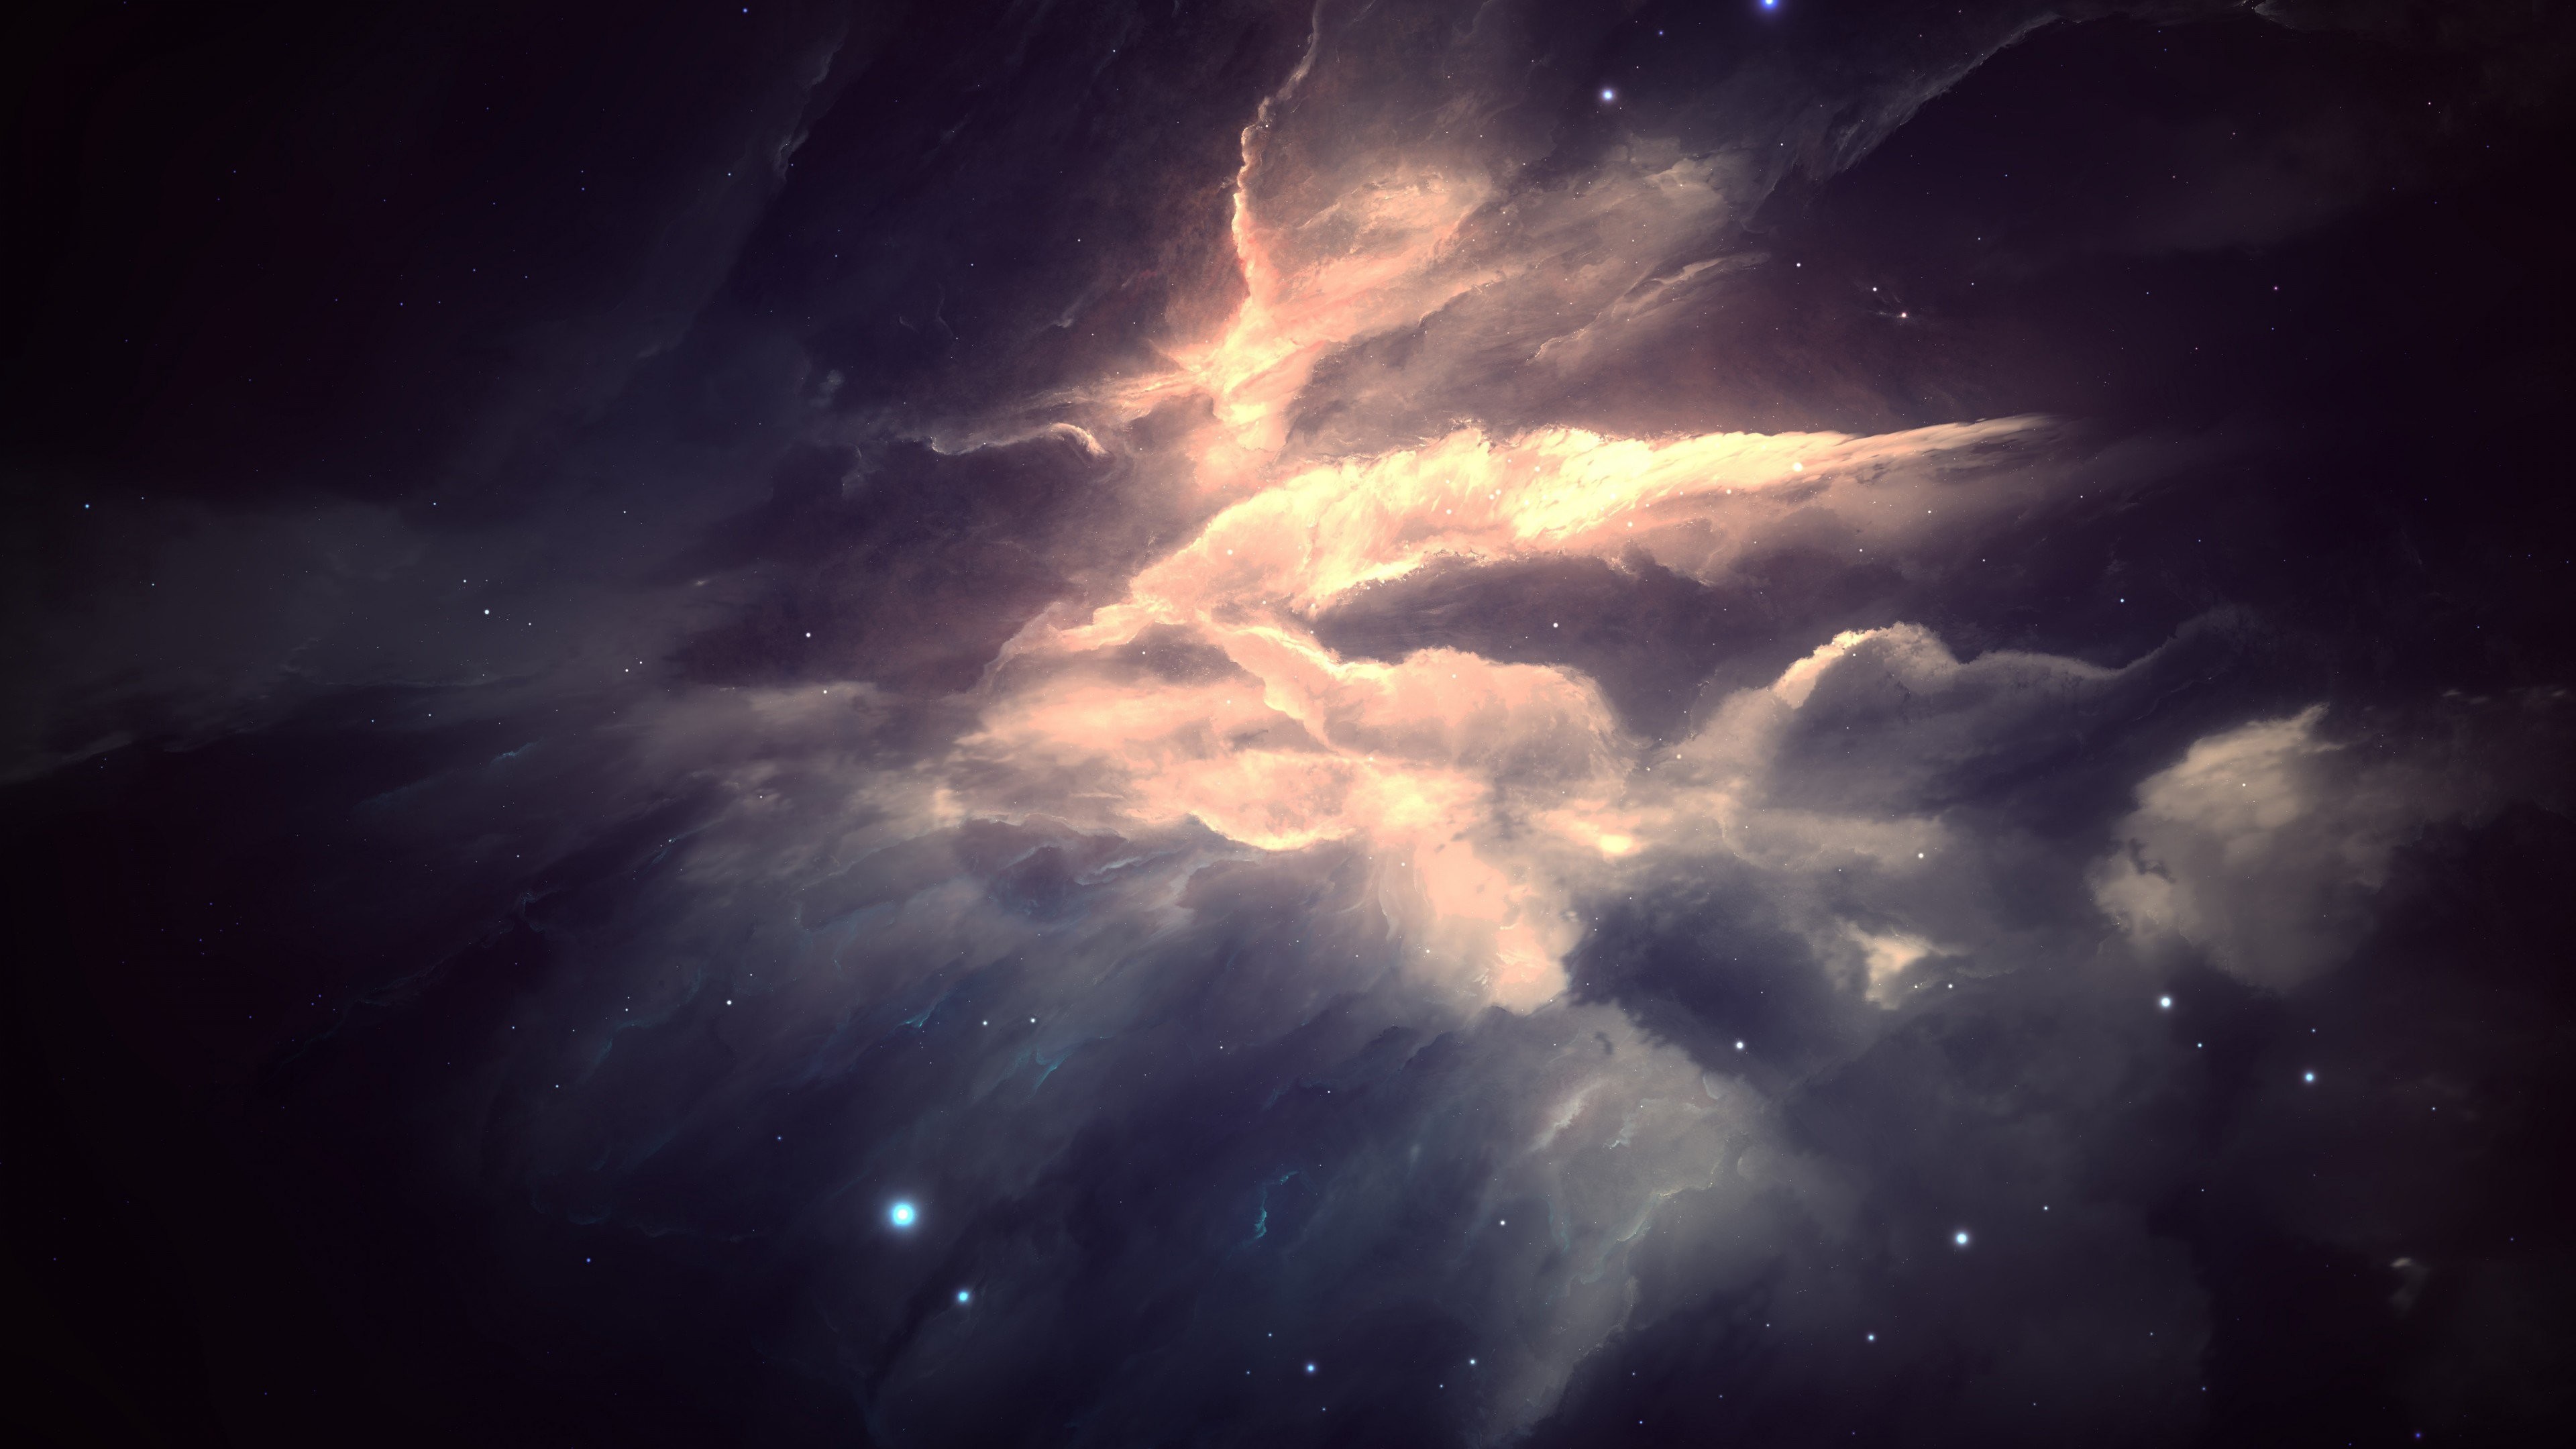 3840x2160 4K Space Wallpapers. by jakkuhtOct 23. Load 22 more images Grid view